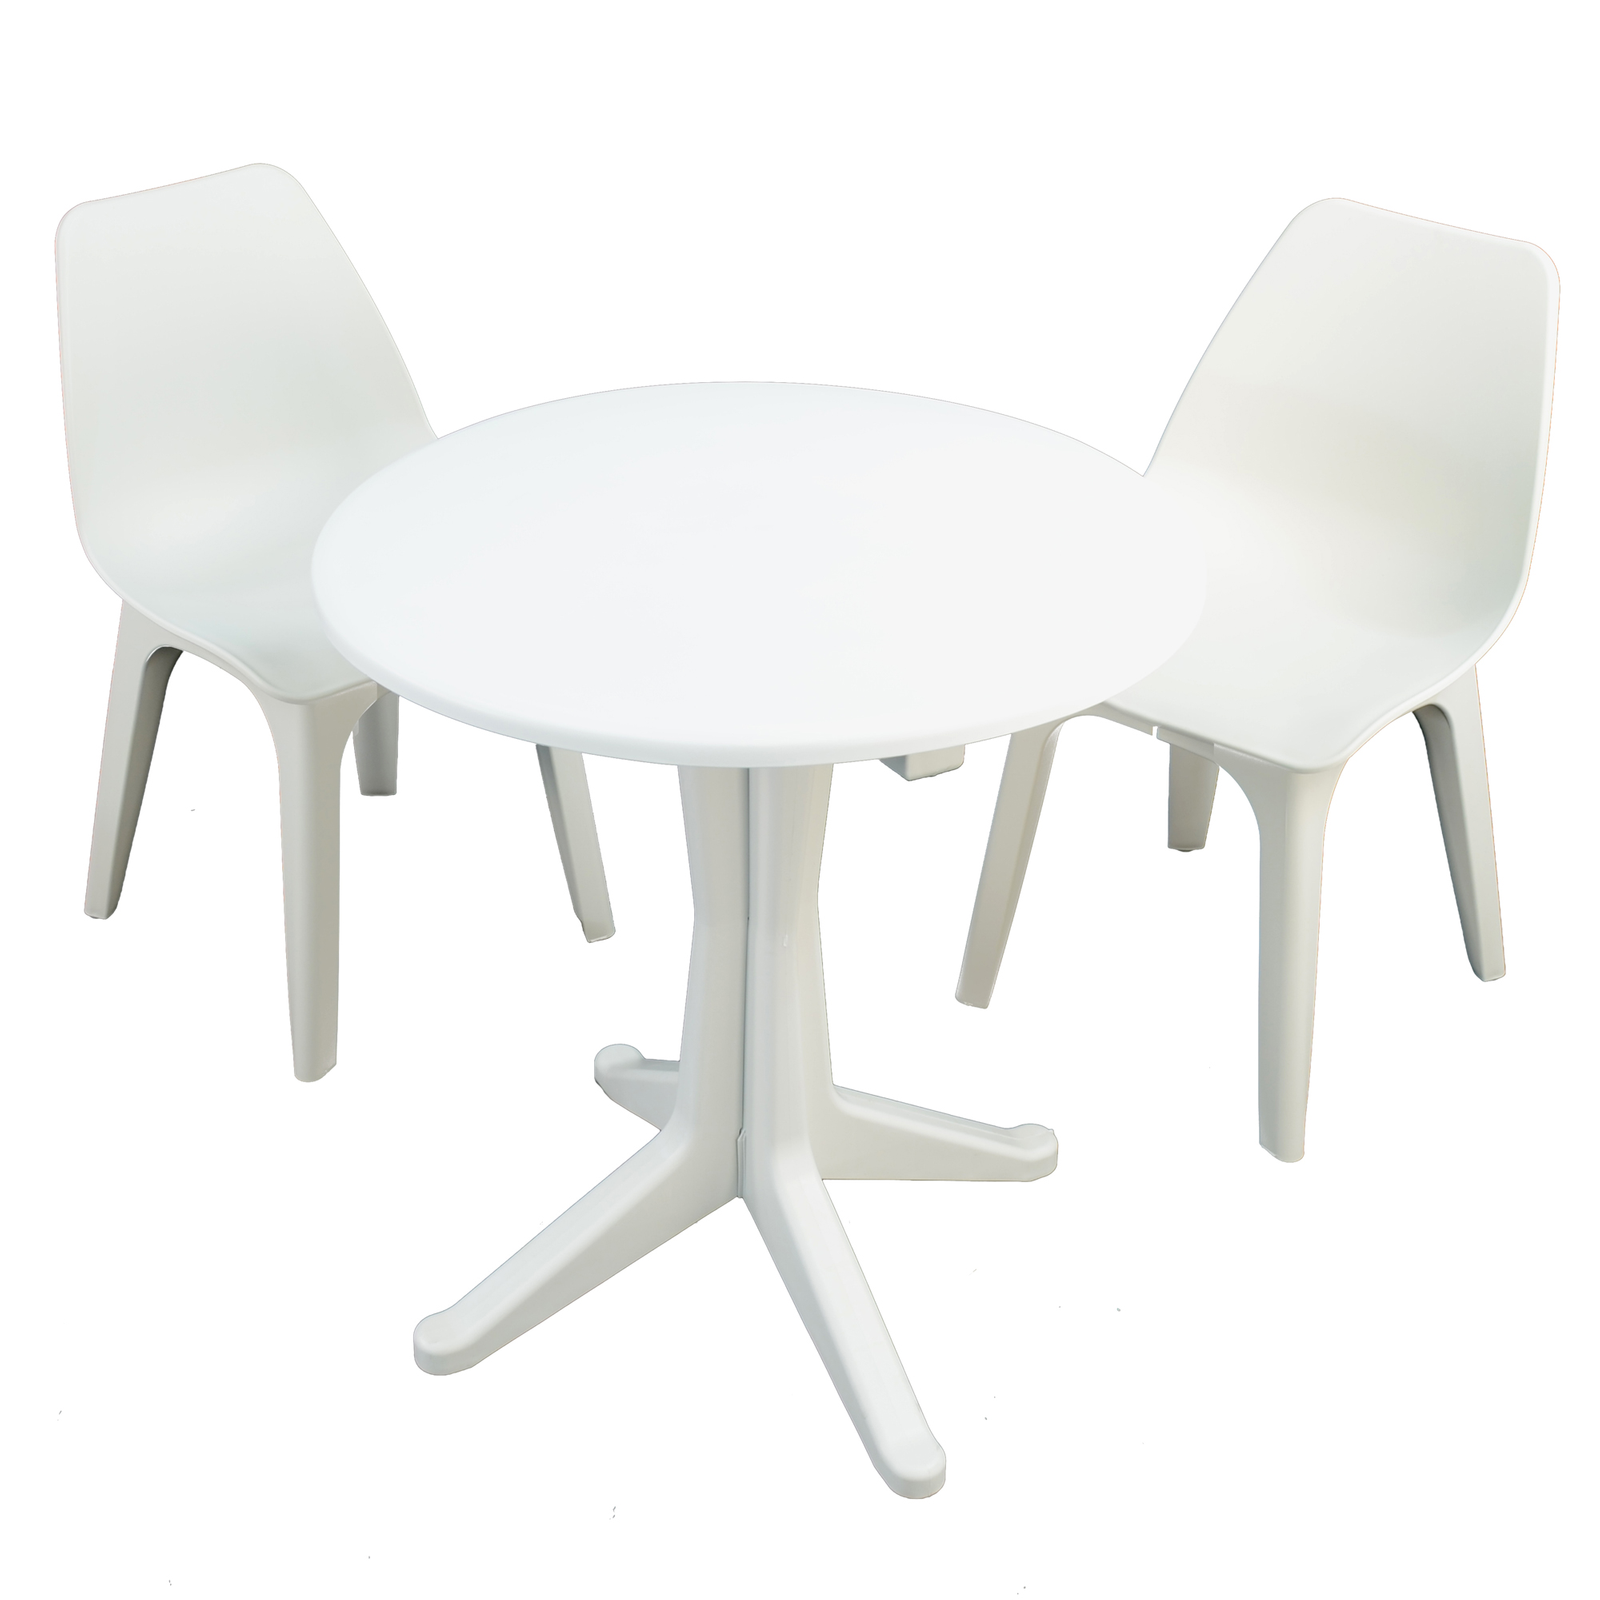 Trabella White Levante Dining Table with 2 Eolo Chairs Dining Sets Trabella   